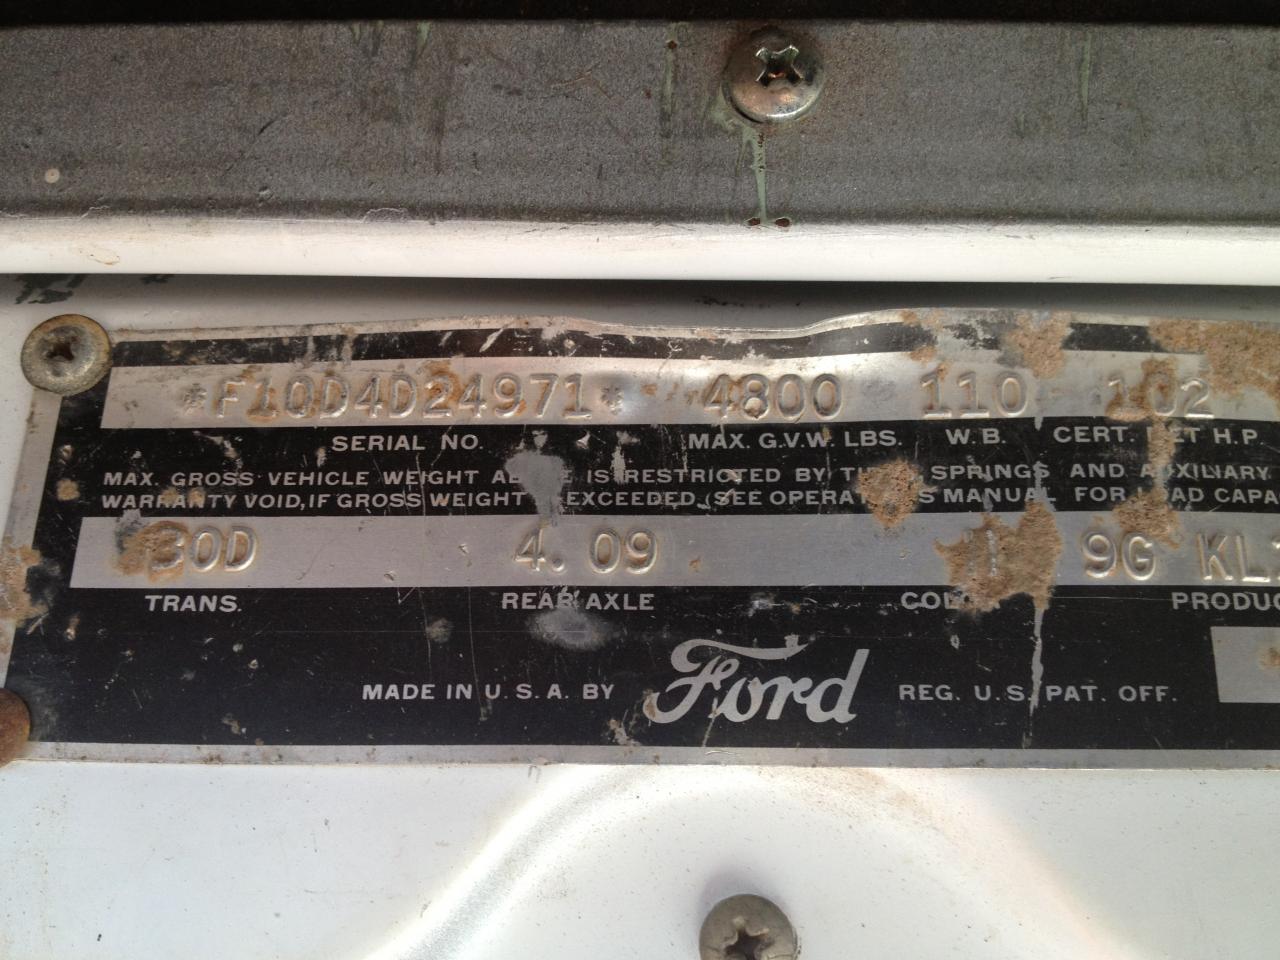 1953 1954 1955 1956 FORD PICKUP TRUCK DATA PLATE TAG STAMPED